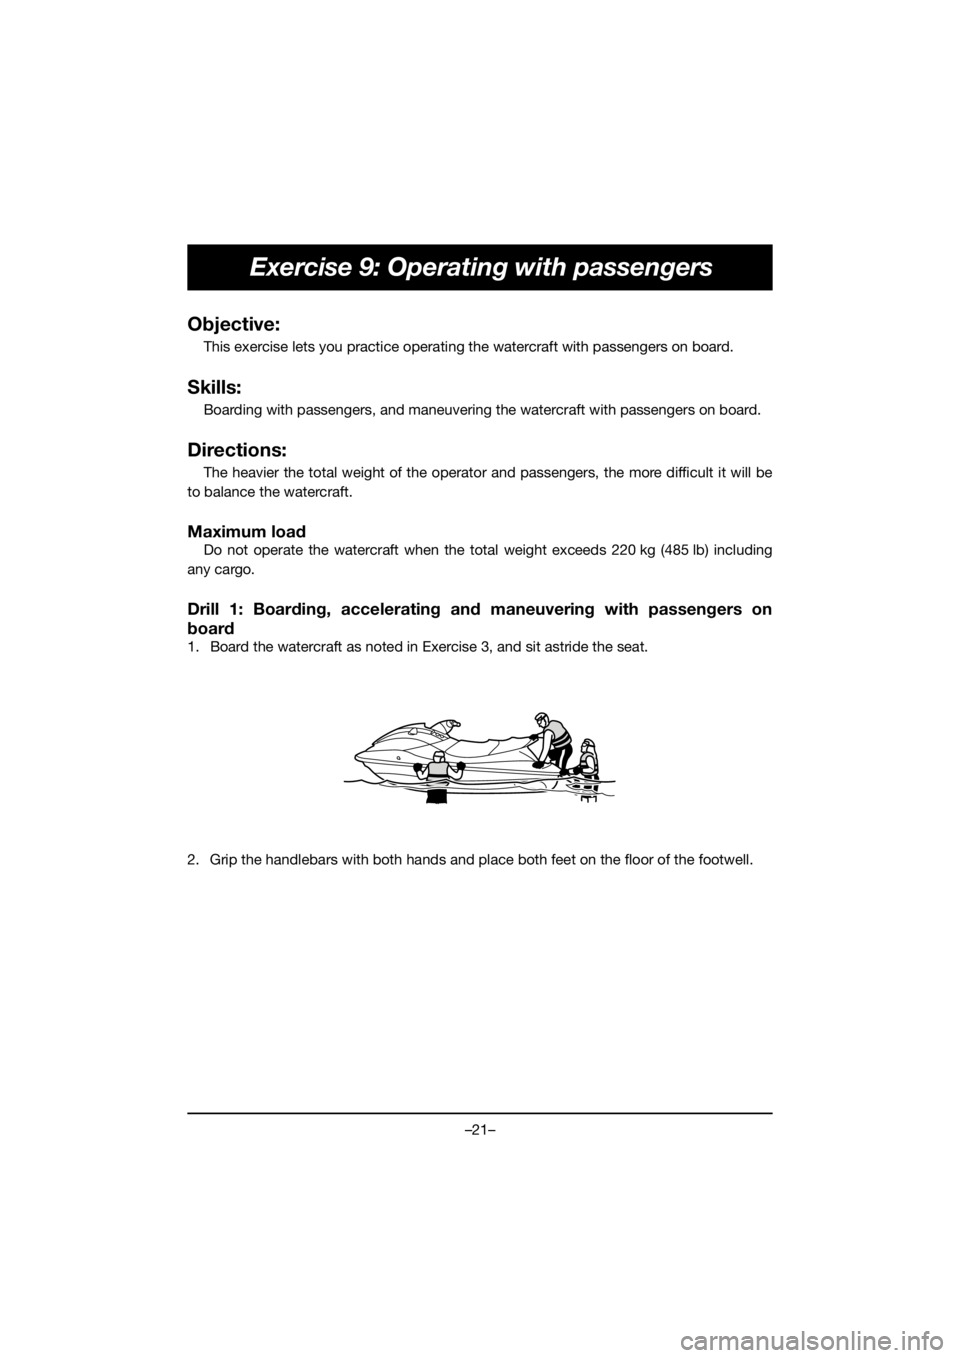 YAMAHA EX 2020  Manual de utilização (in Portuguese) –21–
Exercise 9: Operating with passengers
Objective:
This exercise lets you practice operating the watercraft with passengers on board.
Skills:
Boarding with passengers, and maneuvering the water